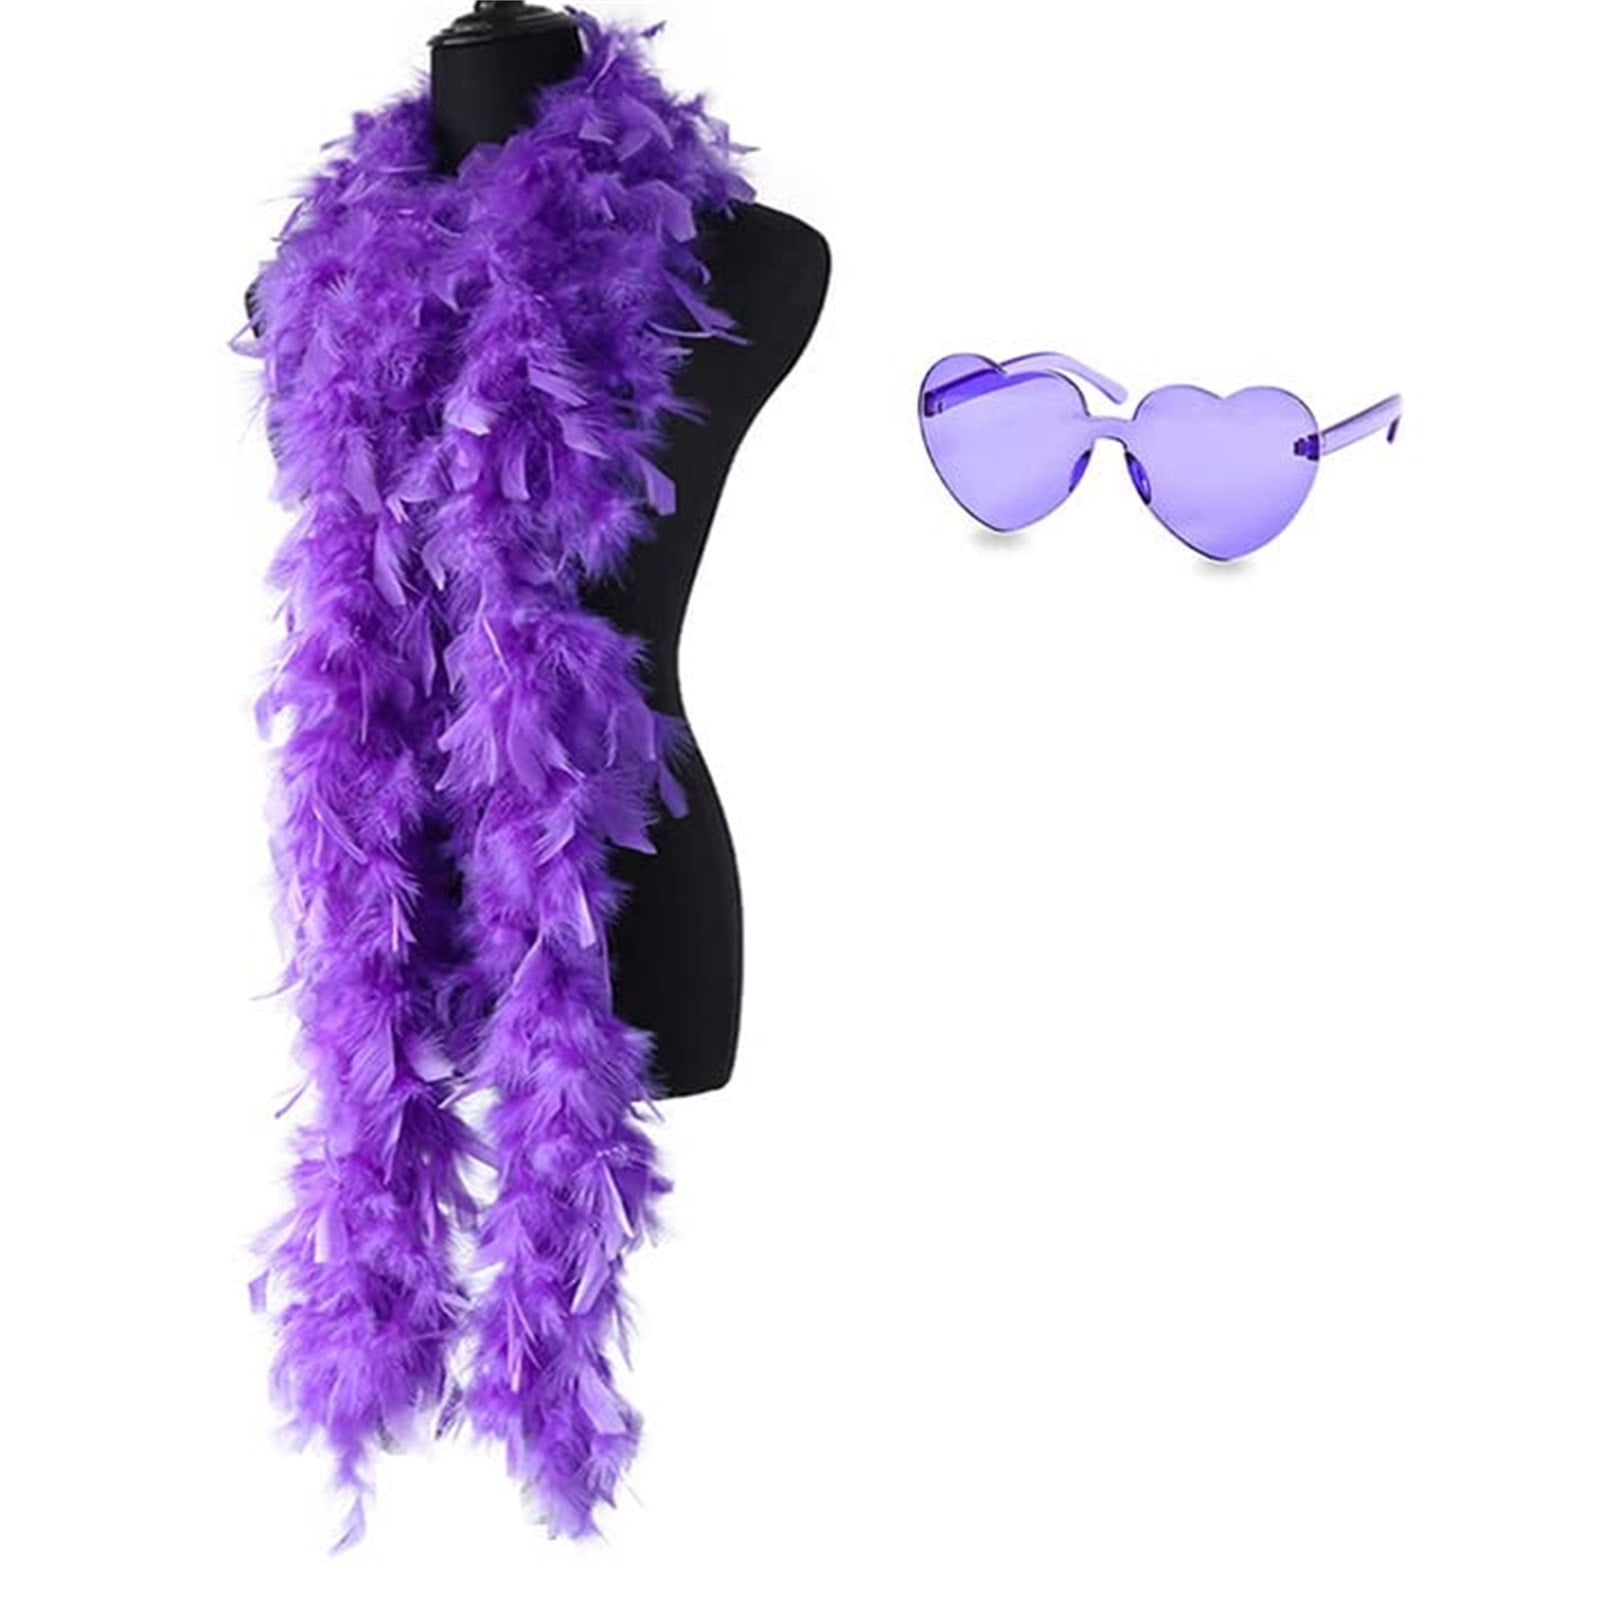 Yohome Save on Event&Party! Feather Boas with Heart Rimless Sunglasses - 2m/6.6ft Feather Boa for Women - Ideal for Dancing, Wedding, Party, Cosplay, Adult